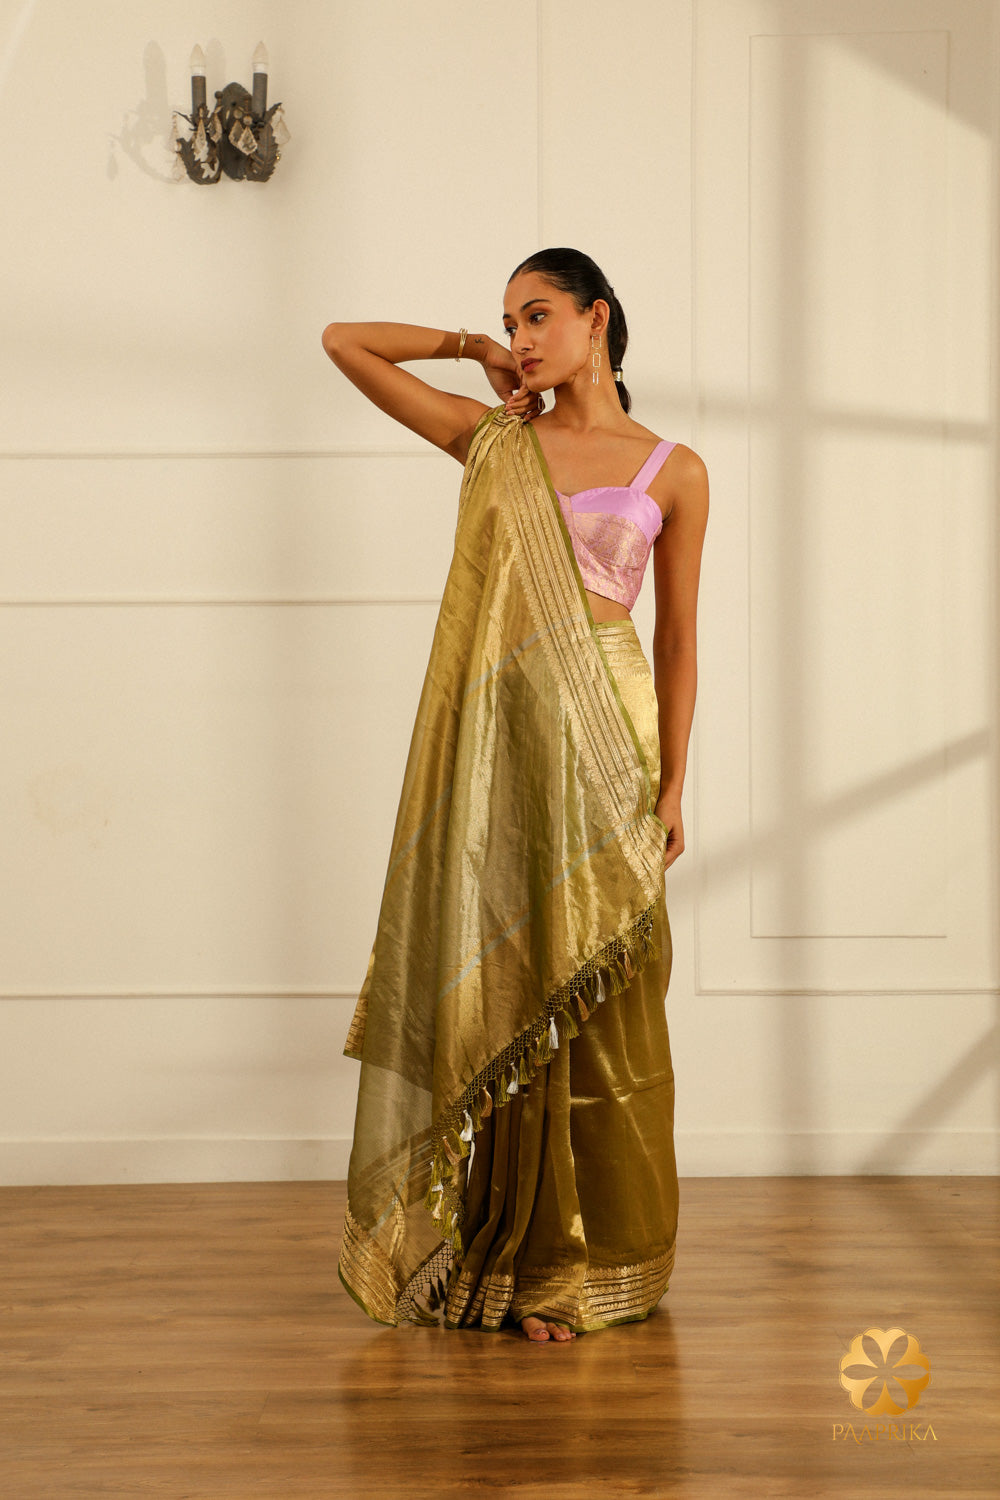 High-quality Tissue Fabric in Olive Green Saree